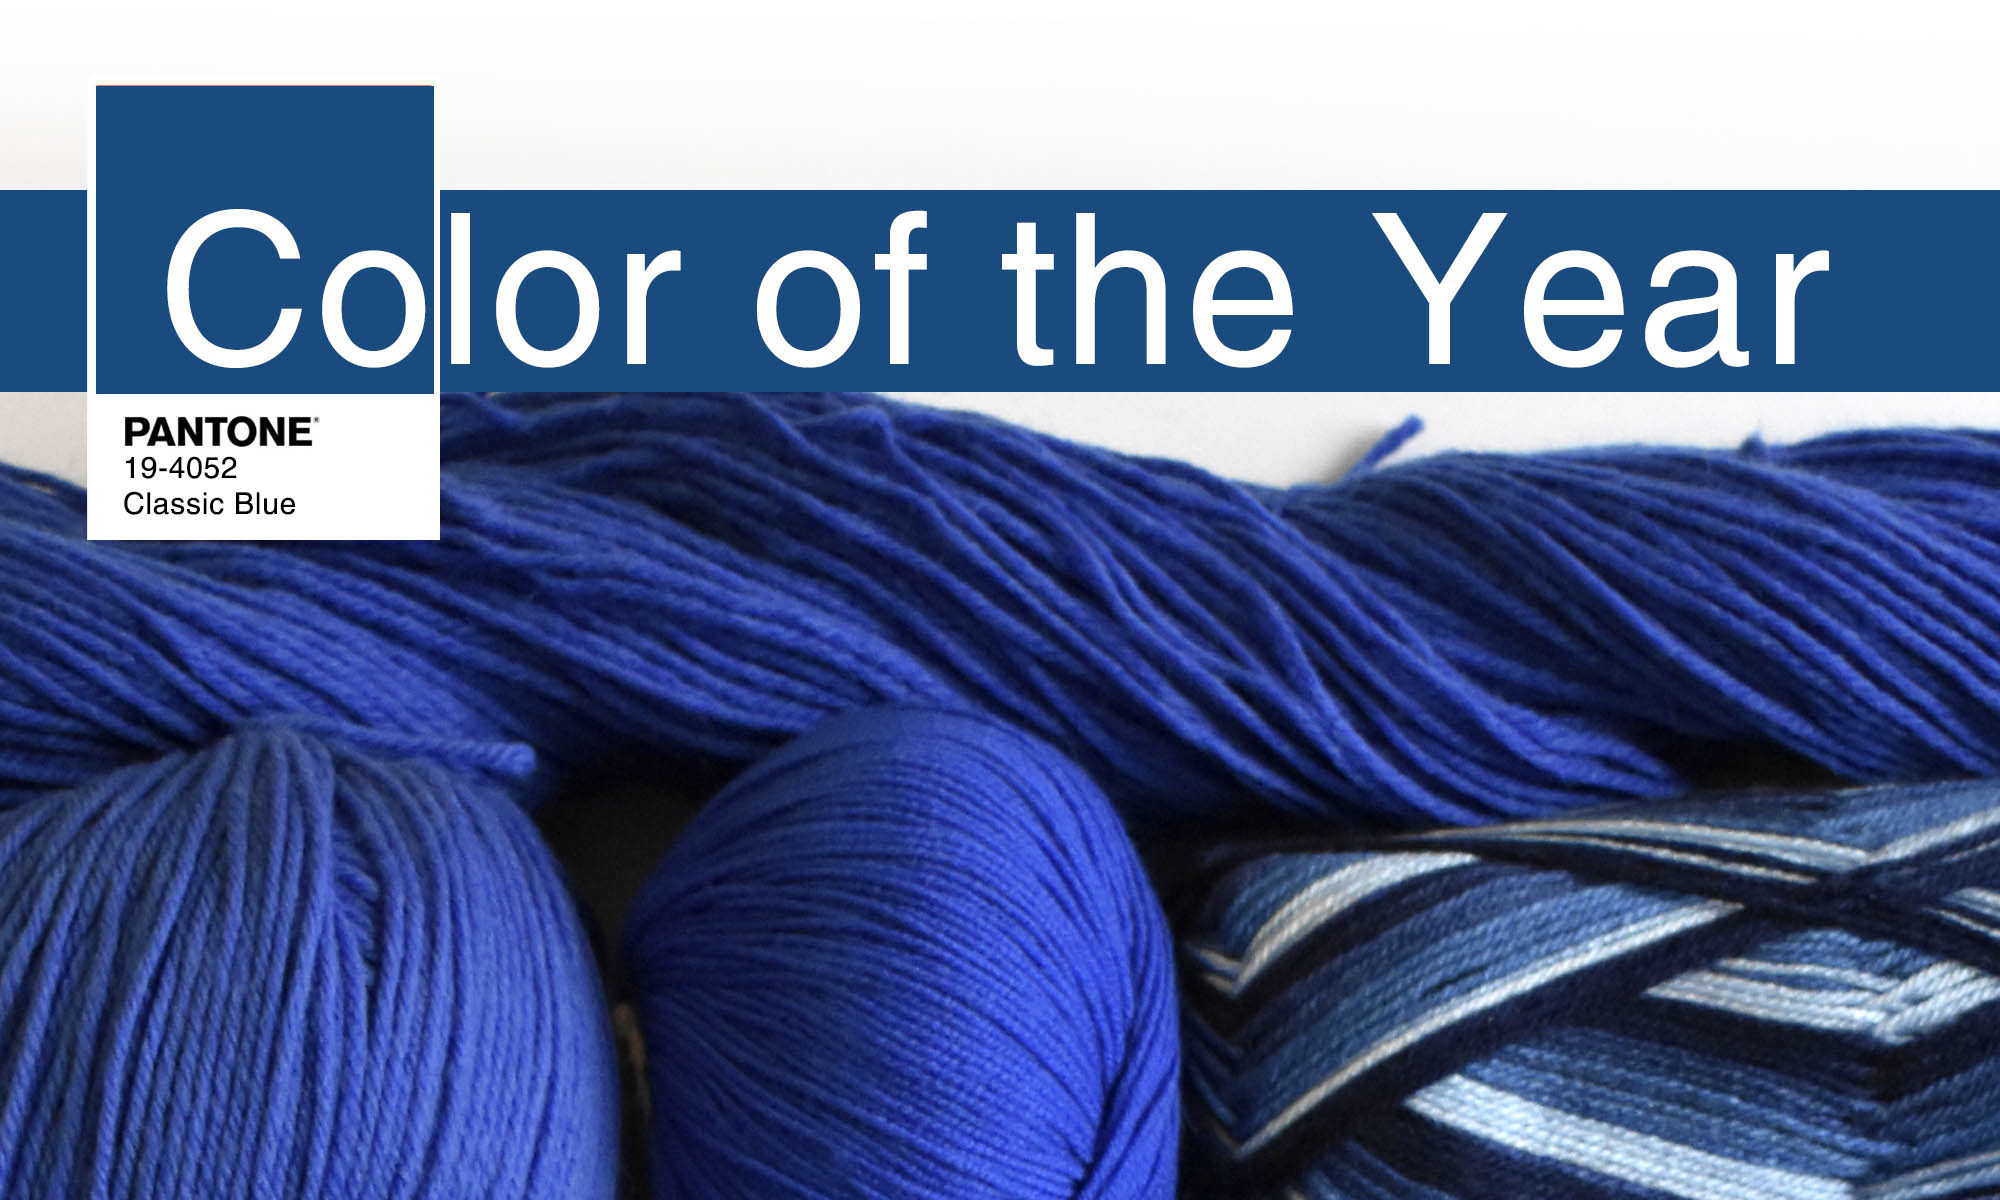 Blue yarn and color of the year banner above